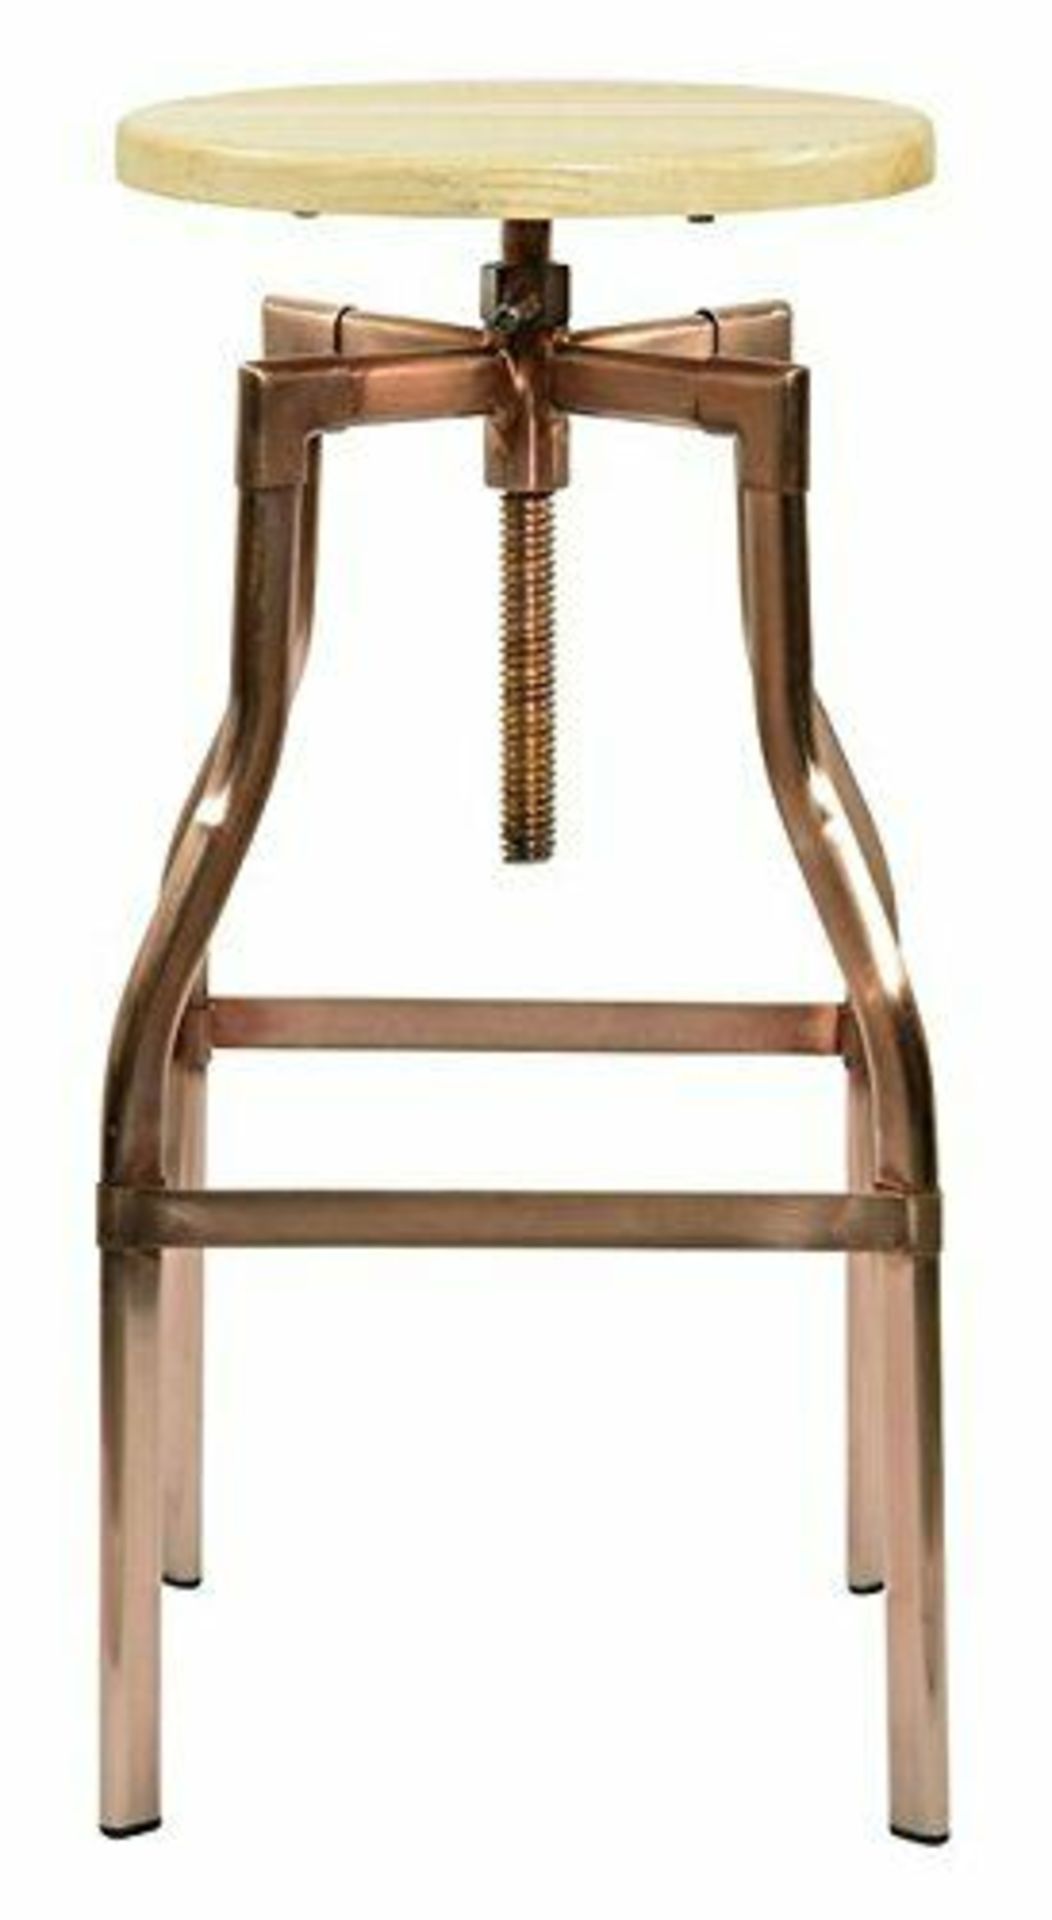 Industrial Copper Bar Stool - Man Cave - Kitchen - Bar - Home - Image 2 of 2